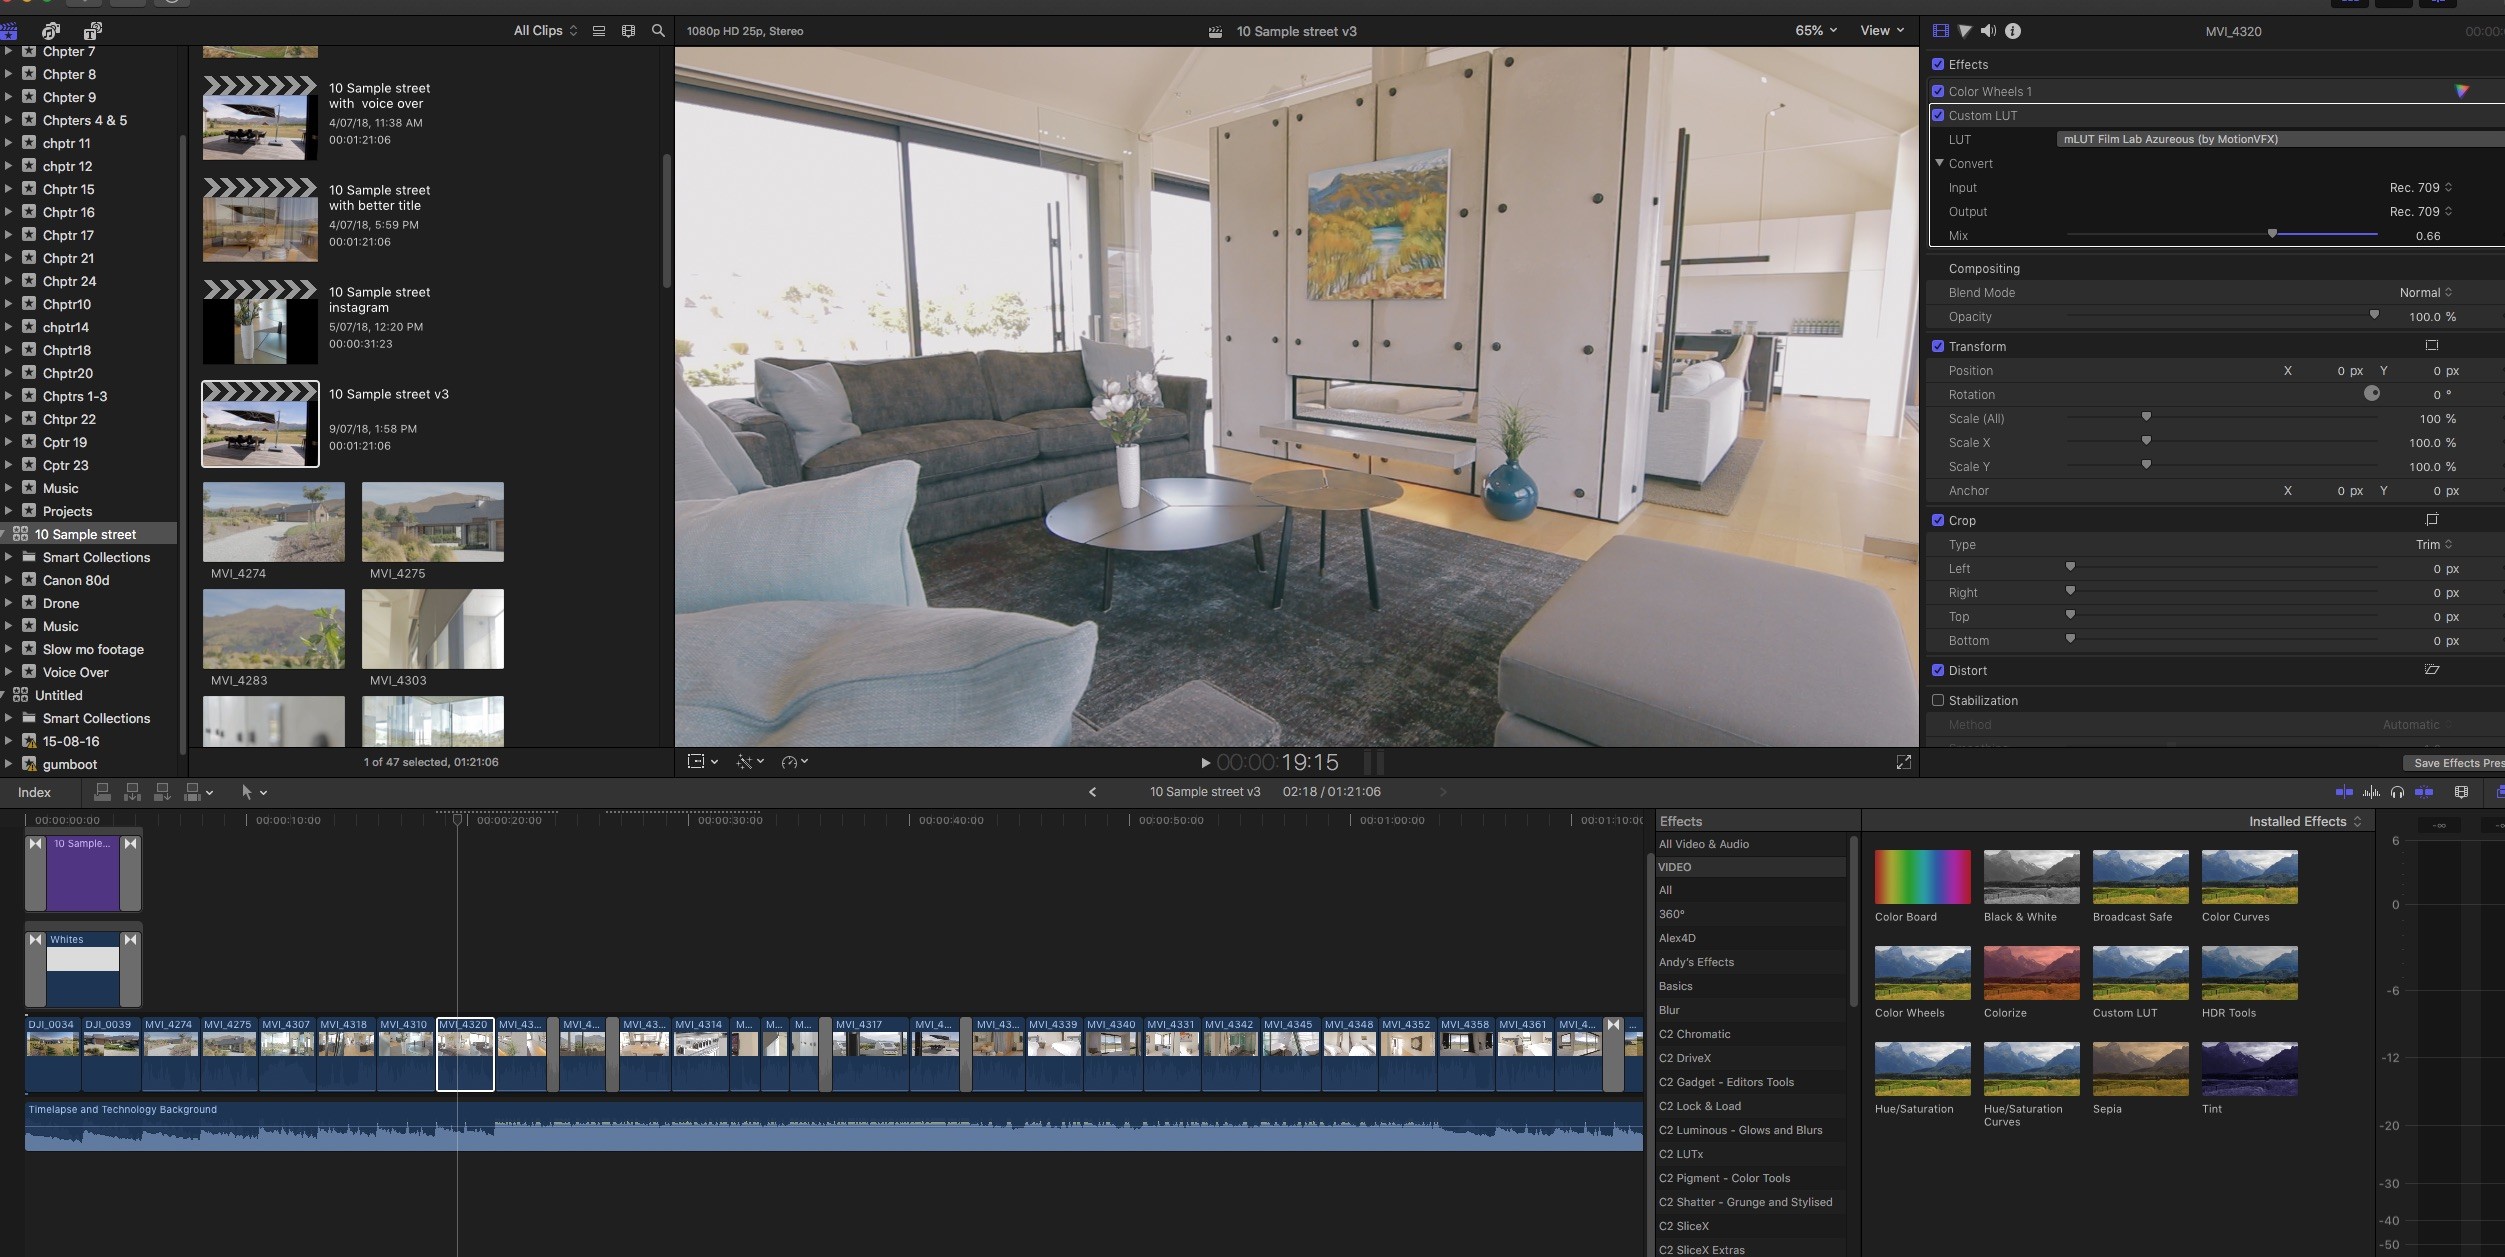 final cut pro effects free for real estate